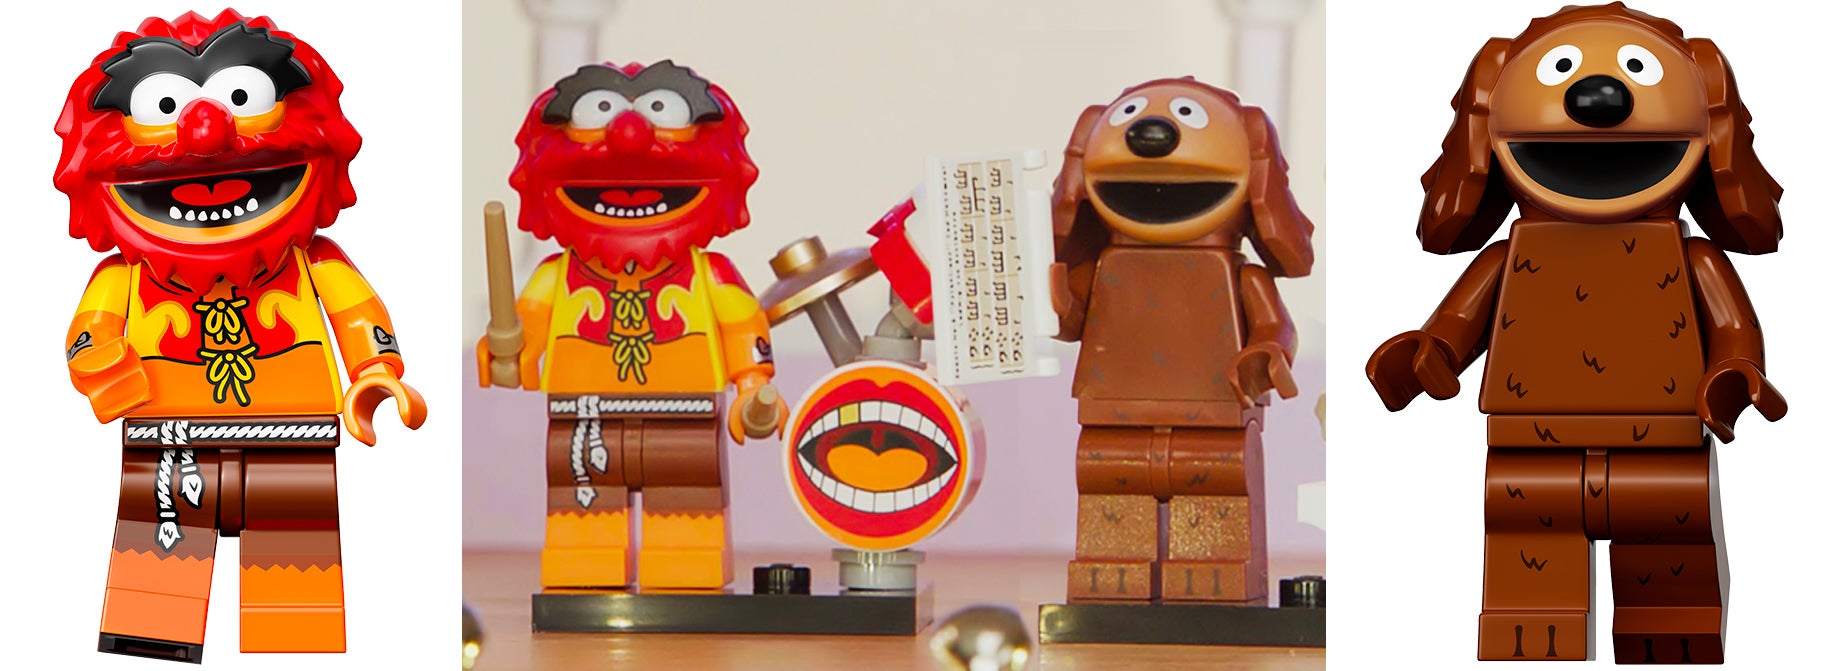 It’s Time to Play the Music and Light the Lights For Lego’s New Muppets Minifigure Collection